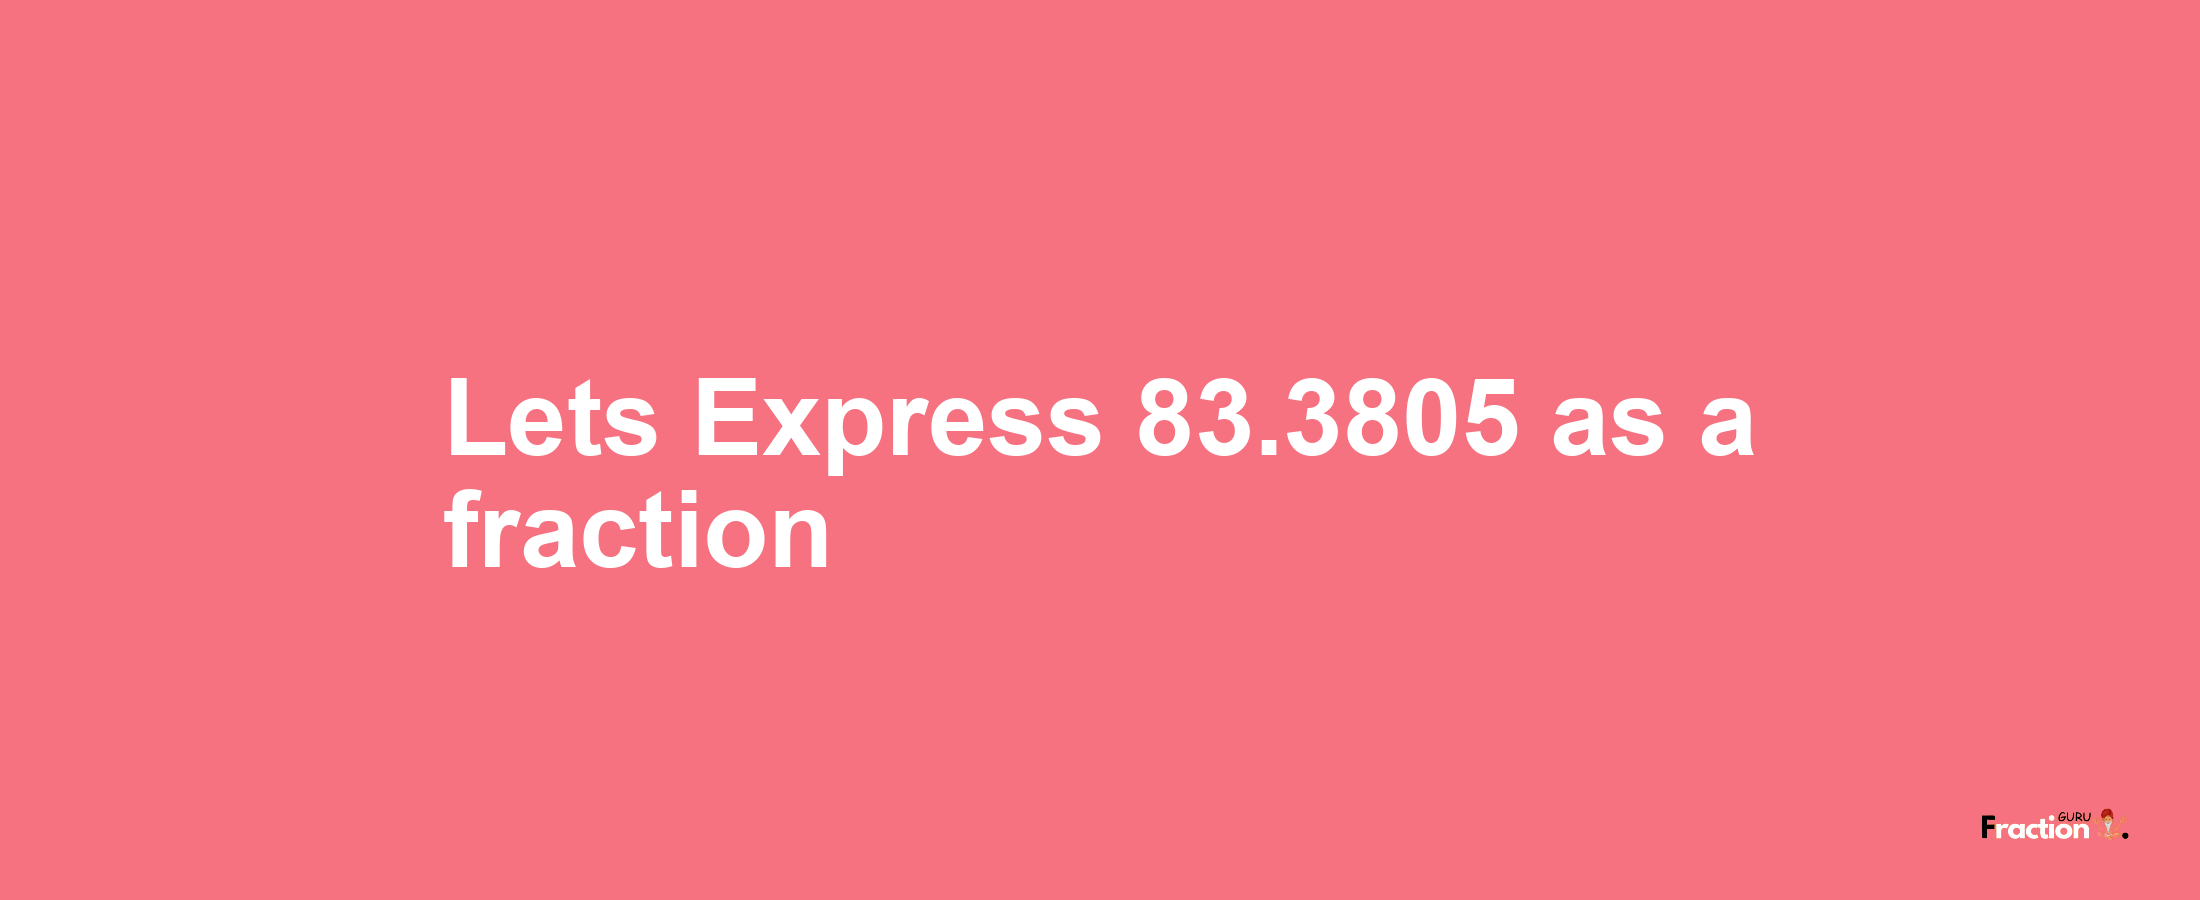 Lets Express 83.3805 as afraction